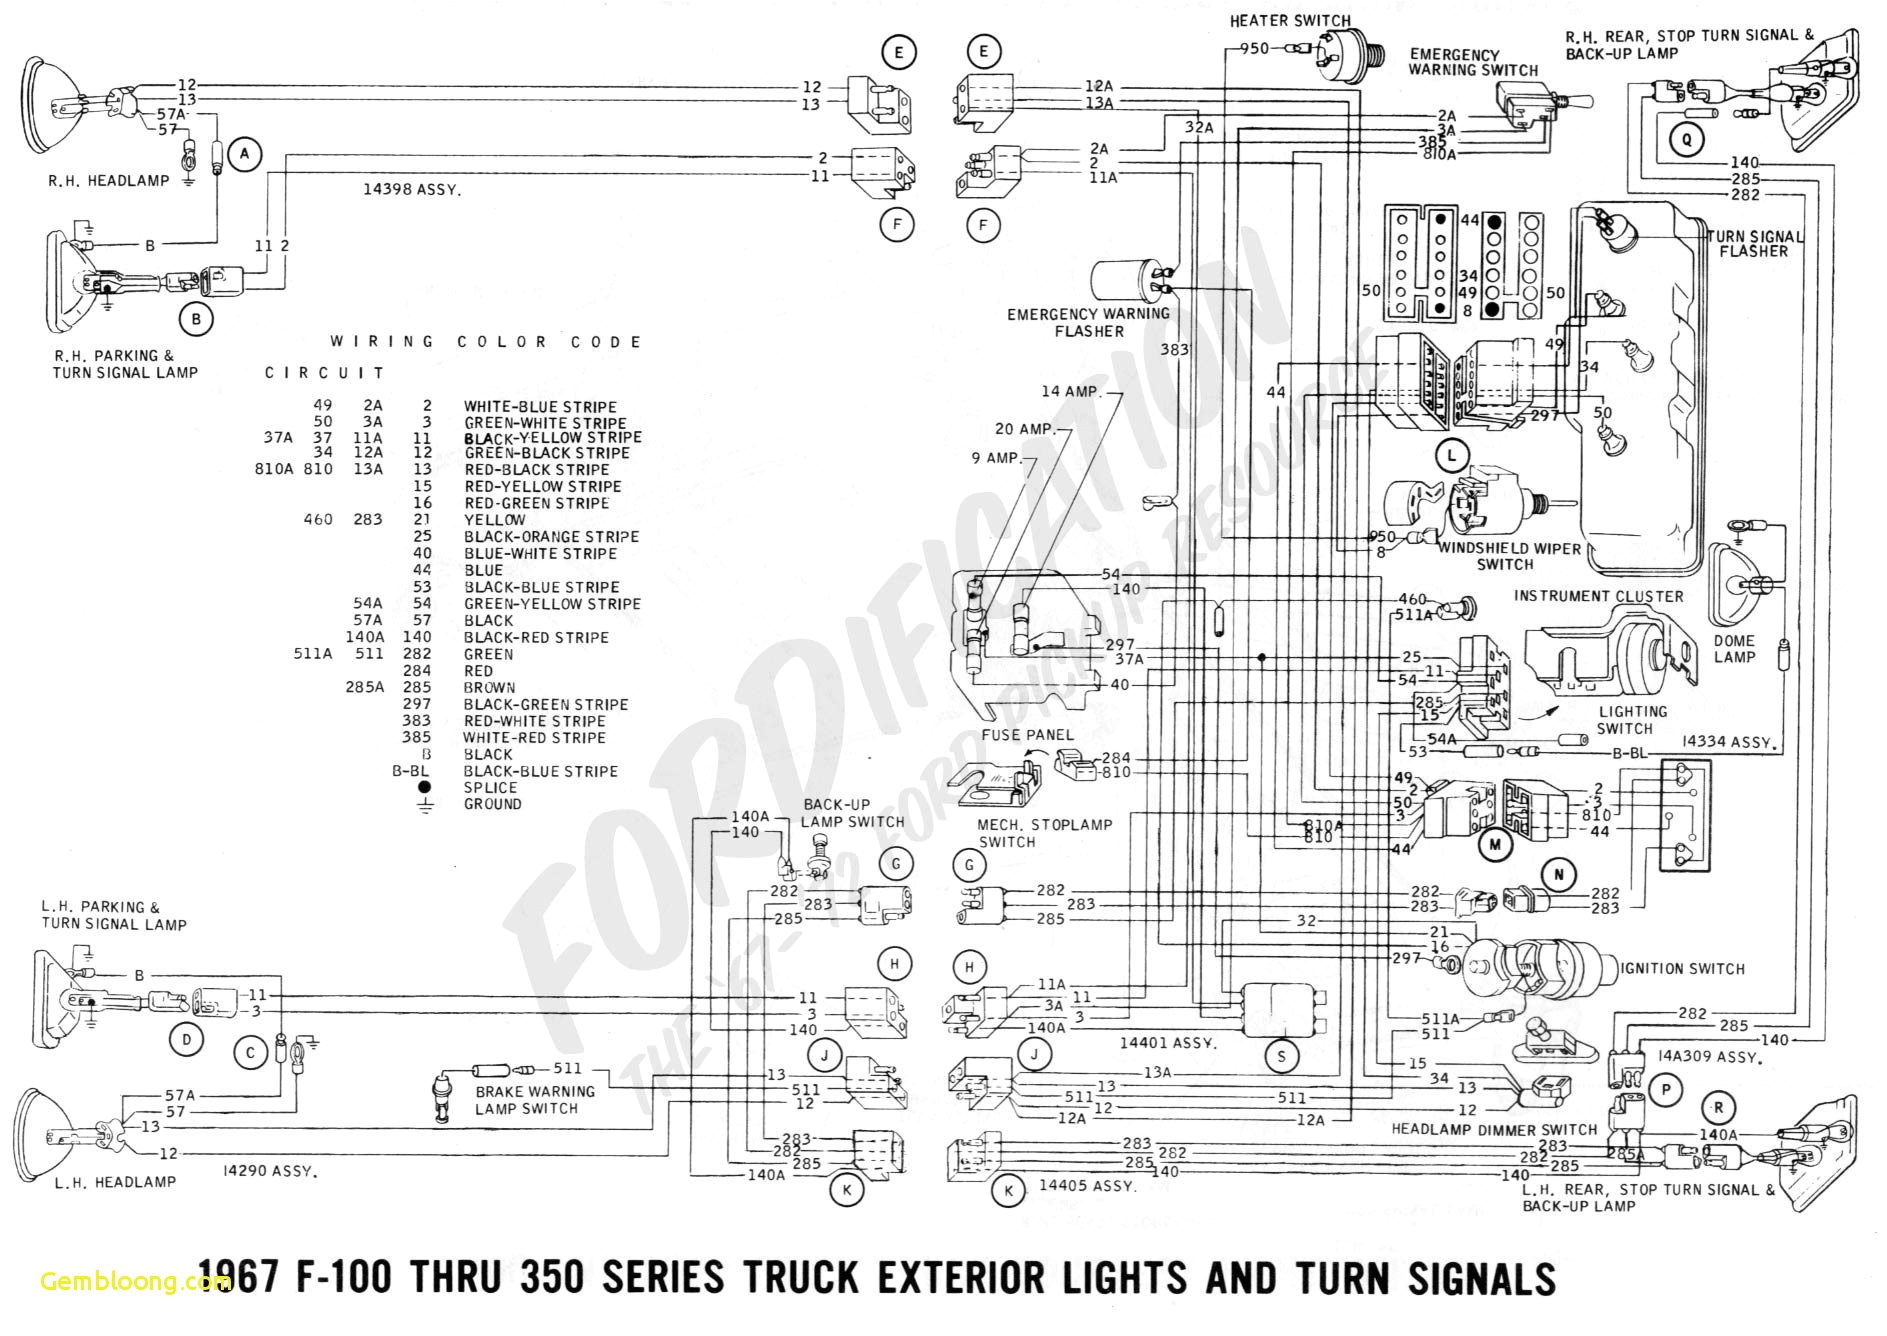 download ford trucks wiring diagrams ford f150 wiring diagrams best volvo s40 2 0d engine diagram free of ford trucks wiring diagrams jpg